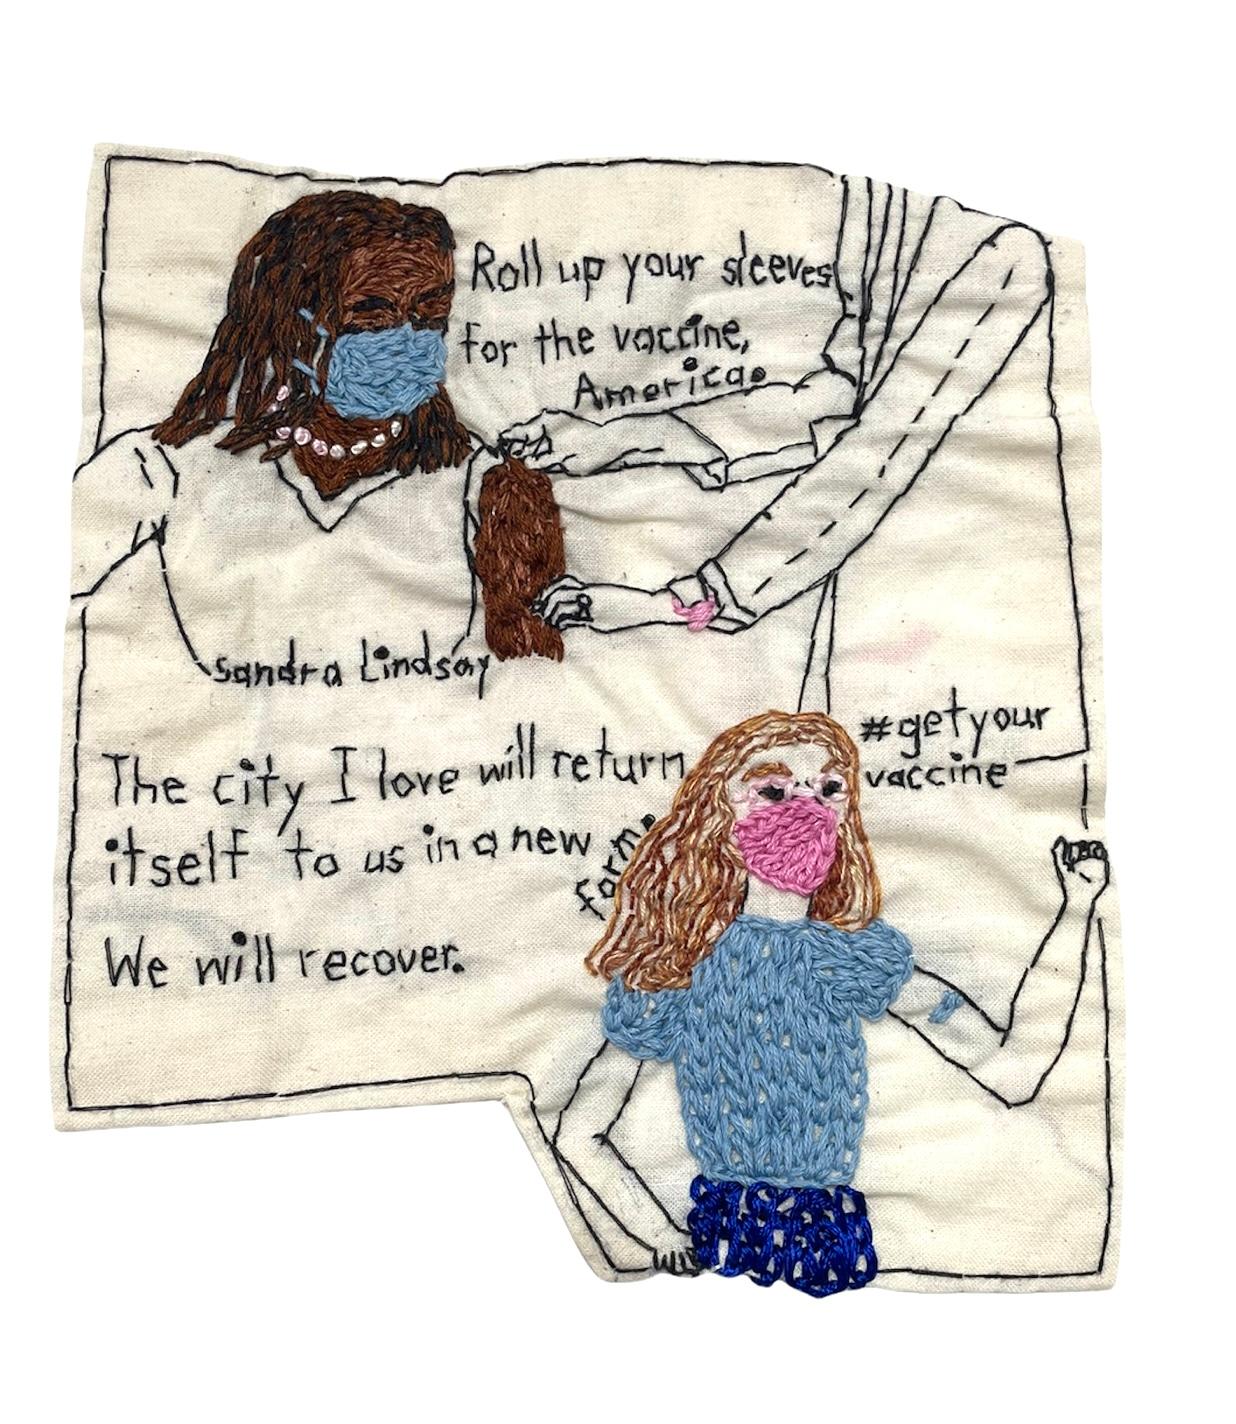 Roll up your sleeves for the vaccine - narrative embroidery on vintage fabric  - Mixed Media Art by Iviva Olenick